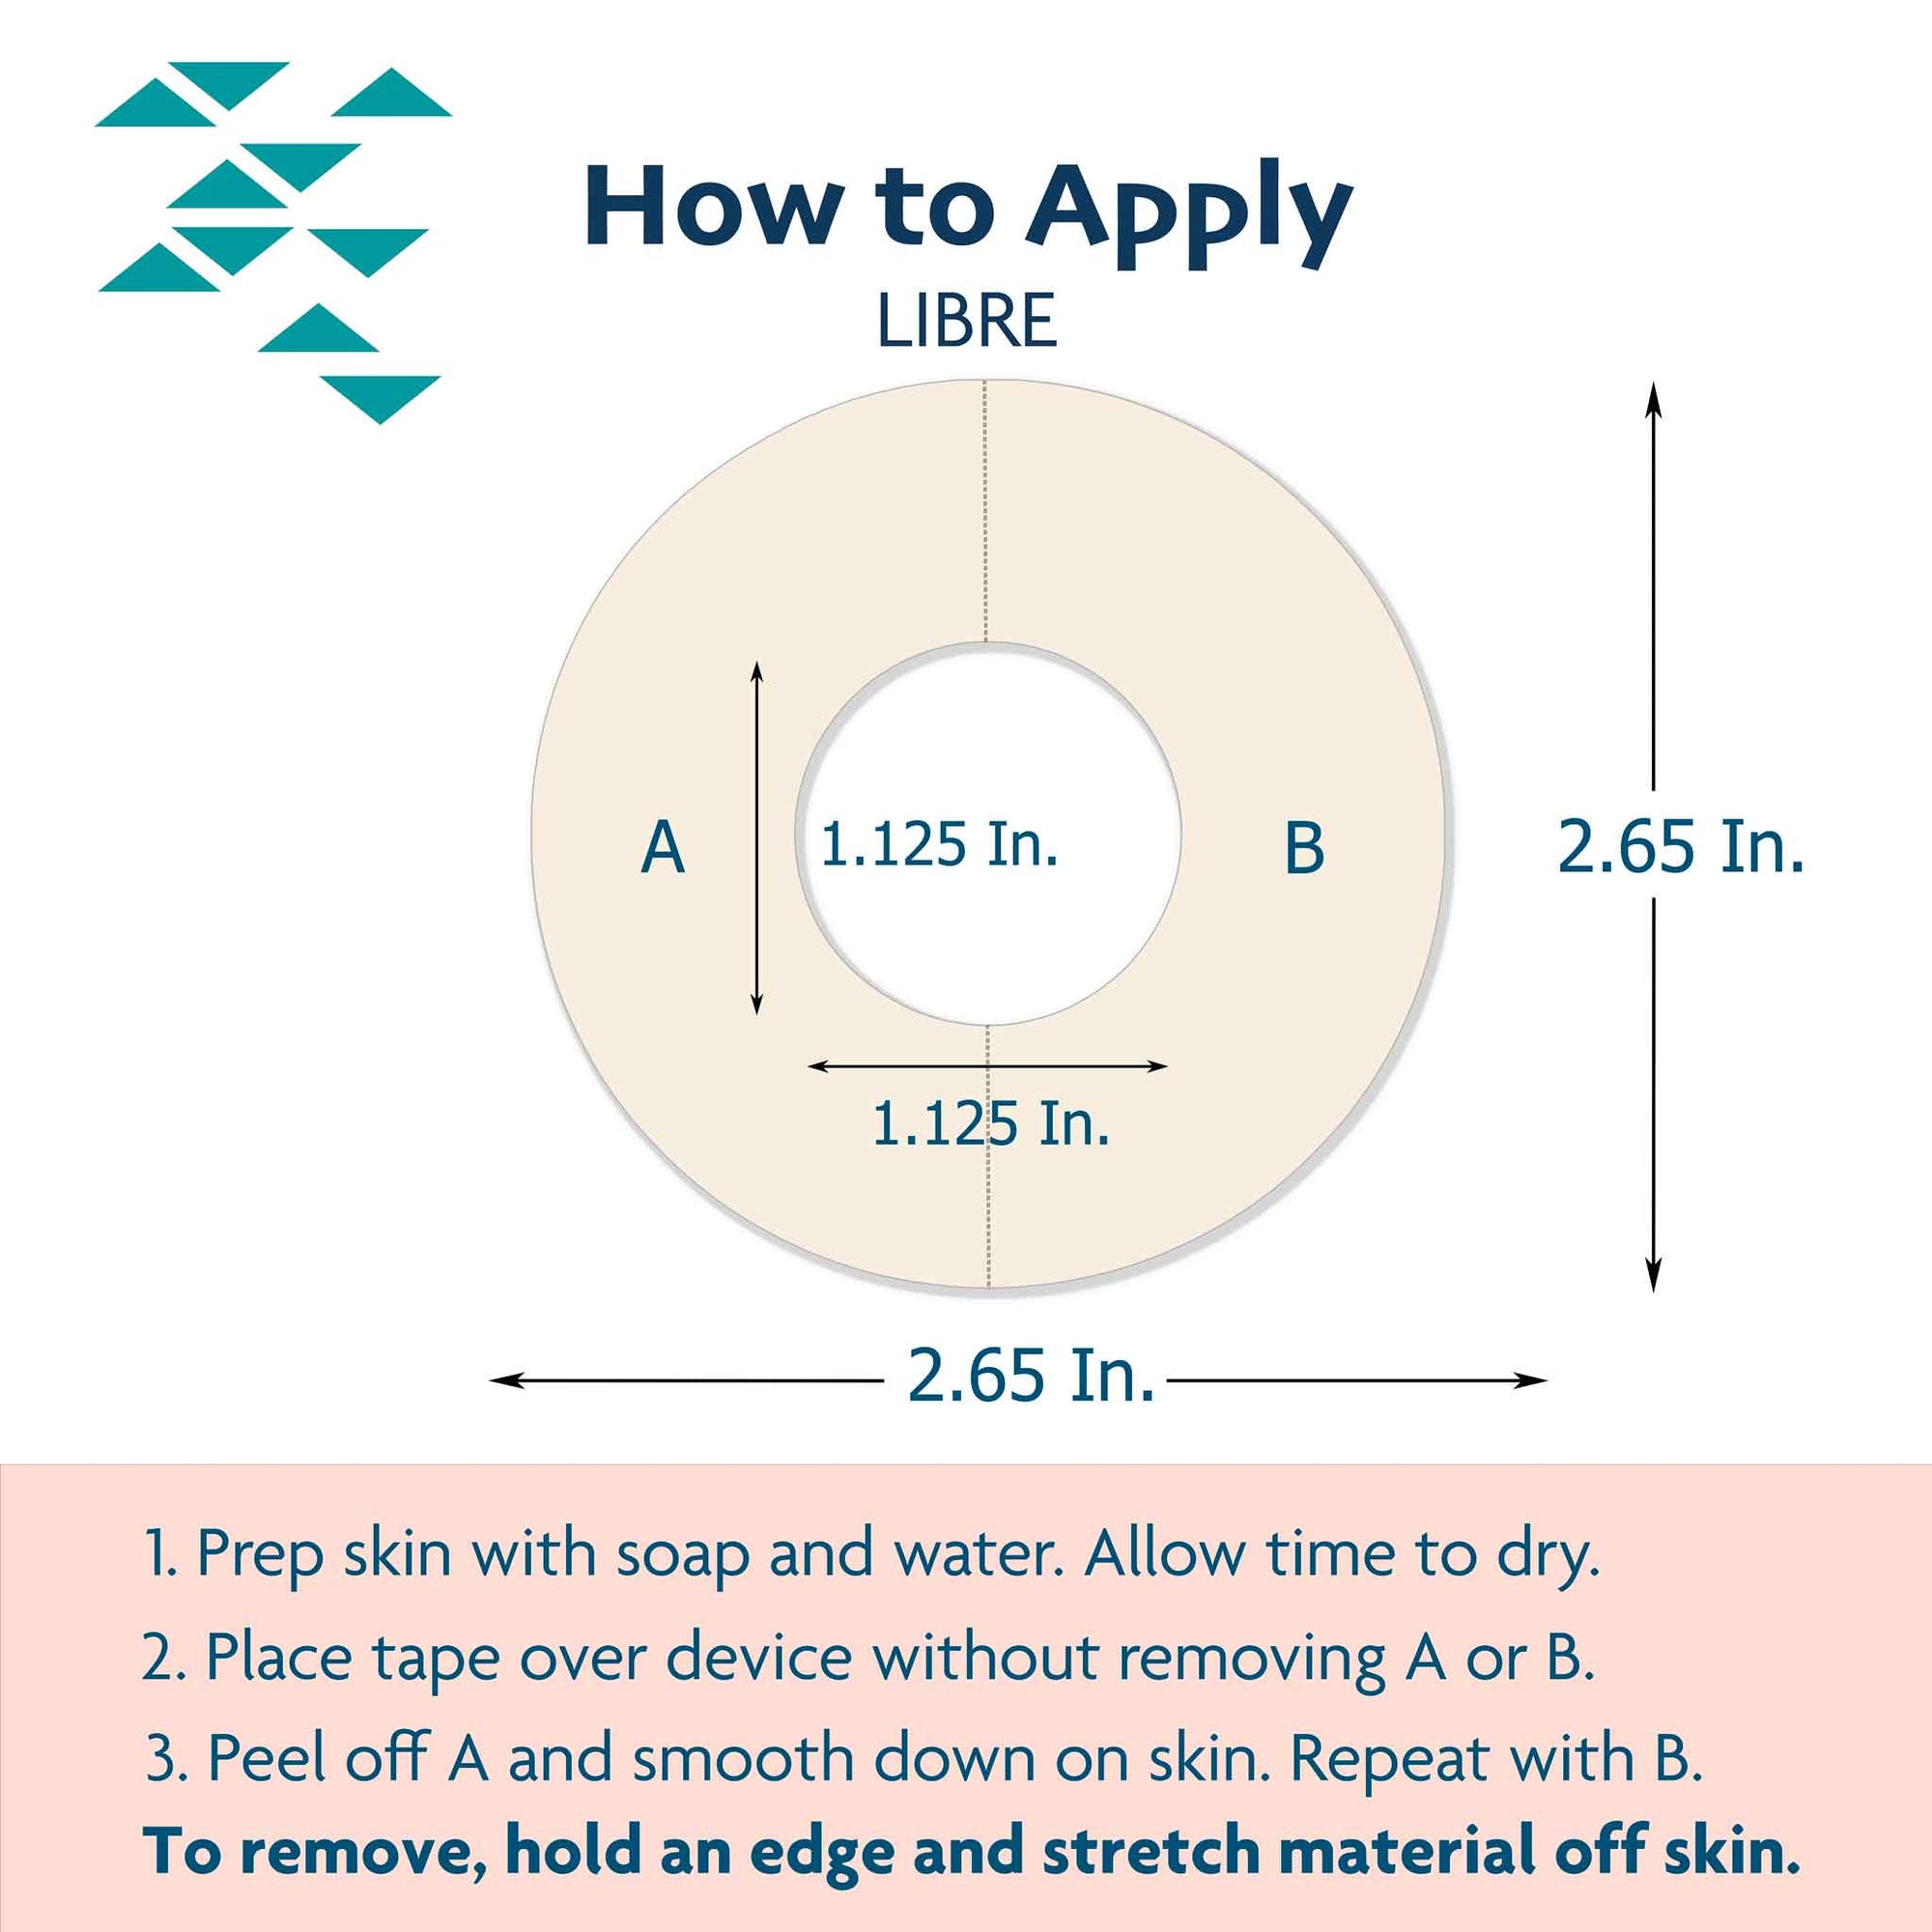 Libre Adhesive Tape Application Instructions